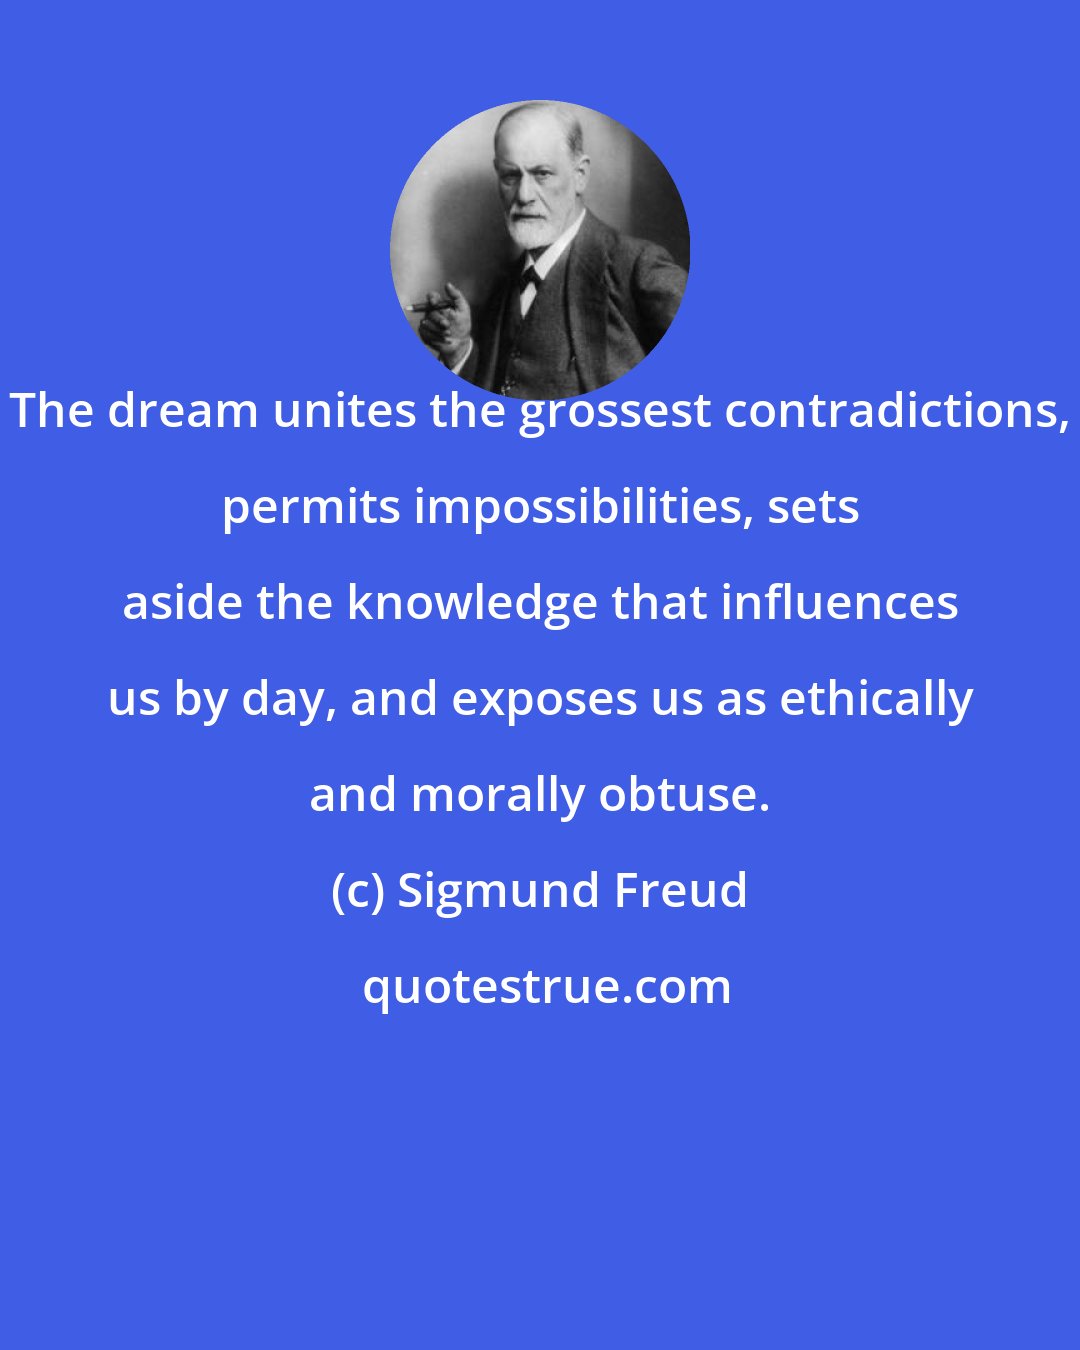 Sigmund Freud: The dream unites the grossest contradictions, permits impossibilities, sets aside the knowledge that influences us by day, and exposes us as ethically and morally obtuse.